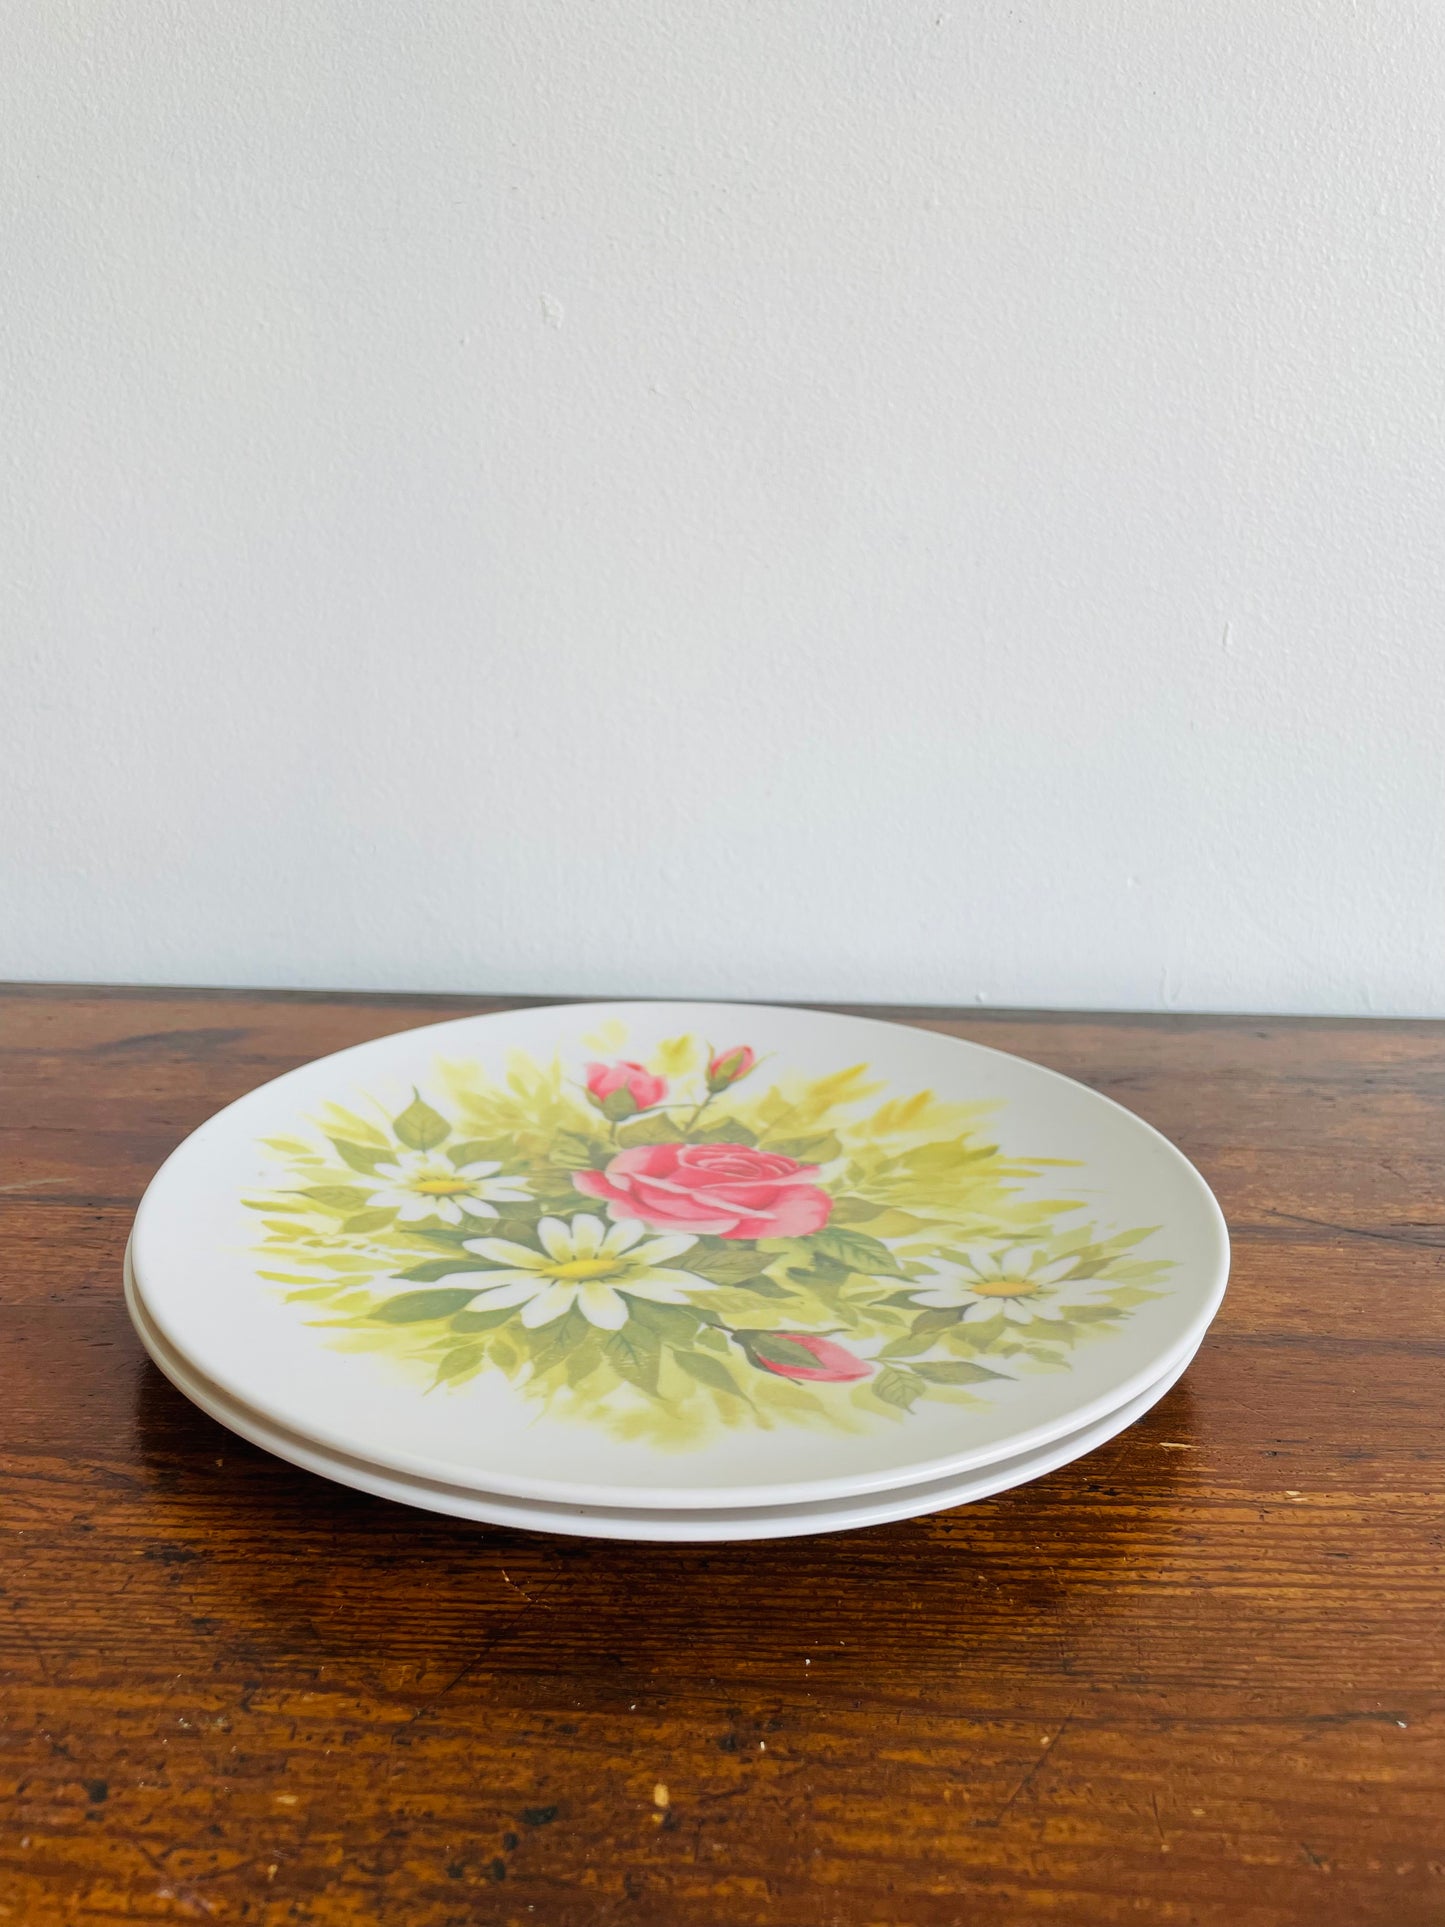 Prolon Melamine Plates with Rose & Daisy Flower Design - Set of 2 - Made in USA